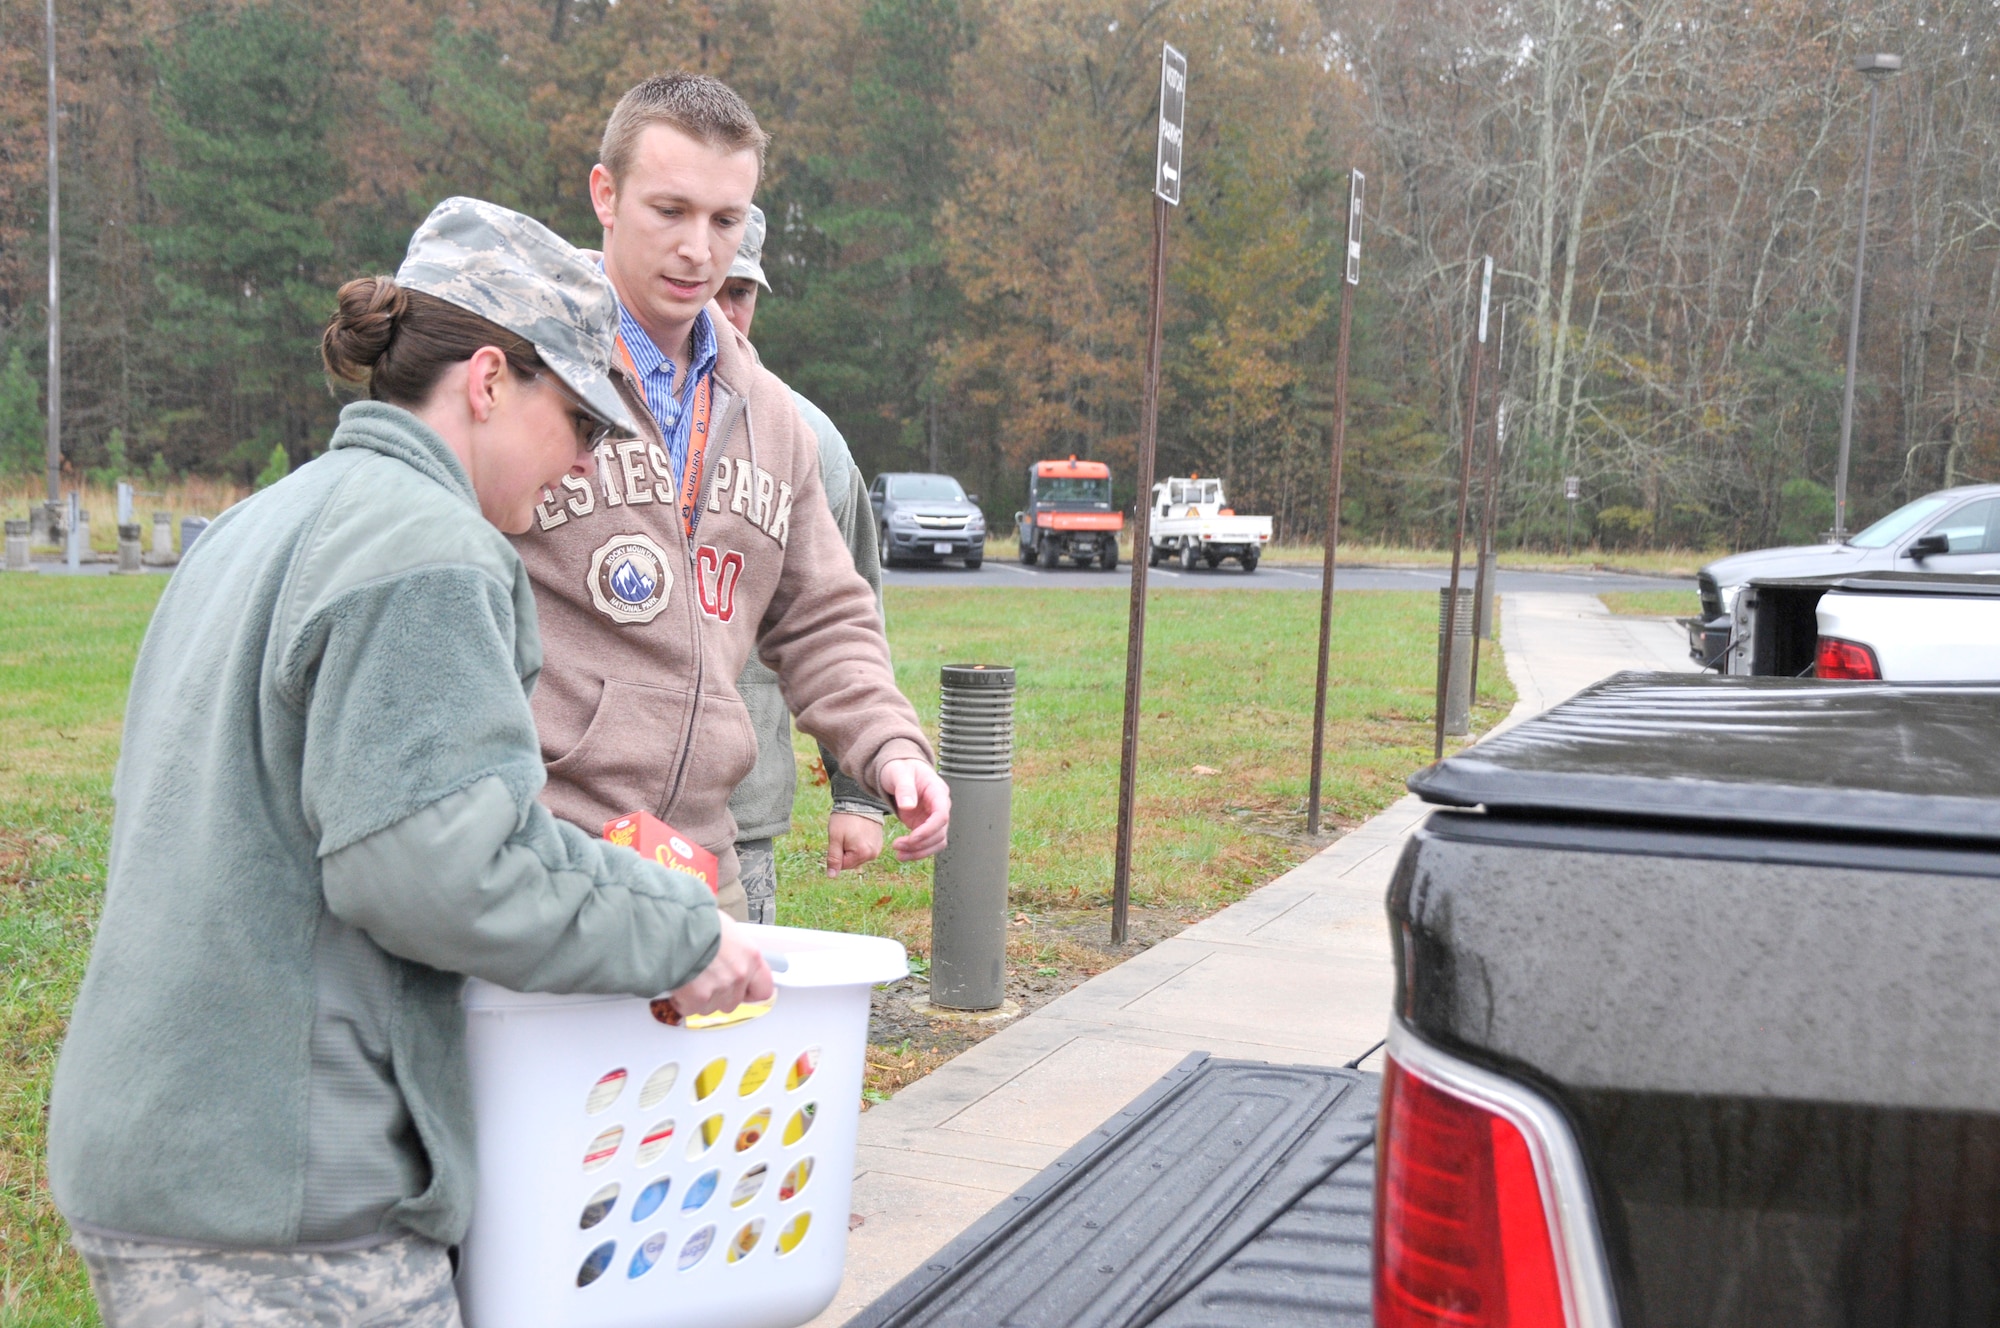 Stephen Maccarino assists 1st Lt. Karlie Madden in loading one of the food baskets donated as part of the Junior Force Council’s Thanksgiving Food Basket Program. With help from AEDC team members across base, JFC members at Arnold collected donations for 51 food baskets for Coffee County families in need of Thanksgiving meals, surpassing the number of baskets that have been collected in years past. (U.S. Air Force photo by Deidre Ortiz)